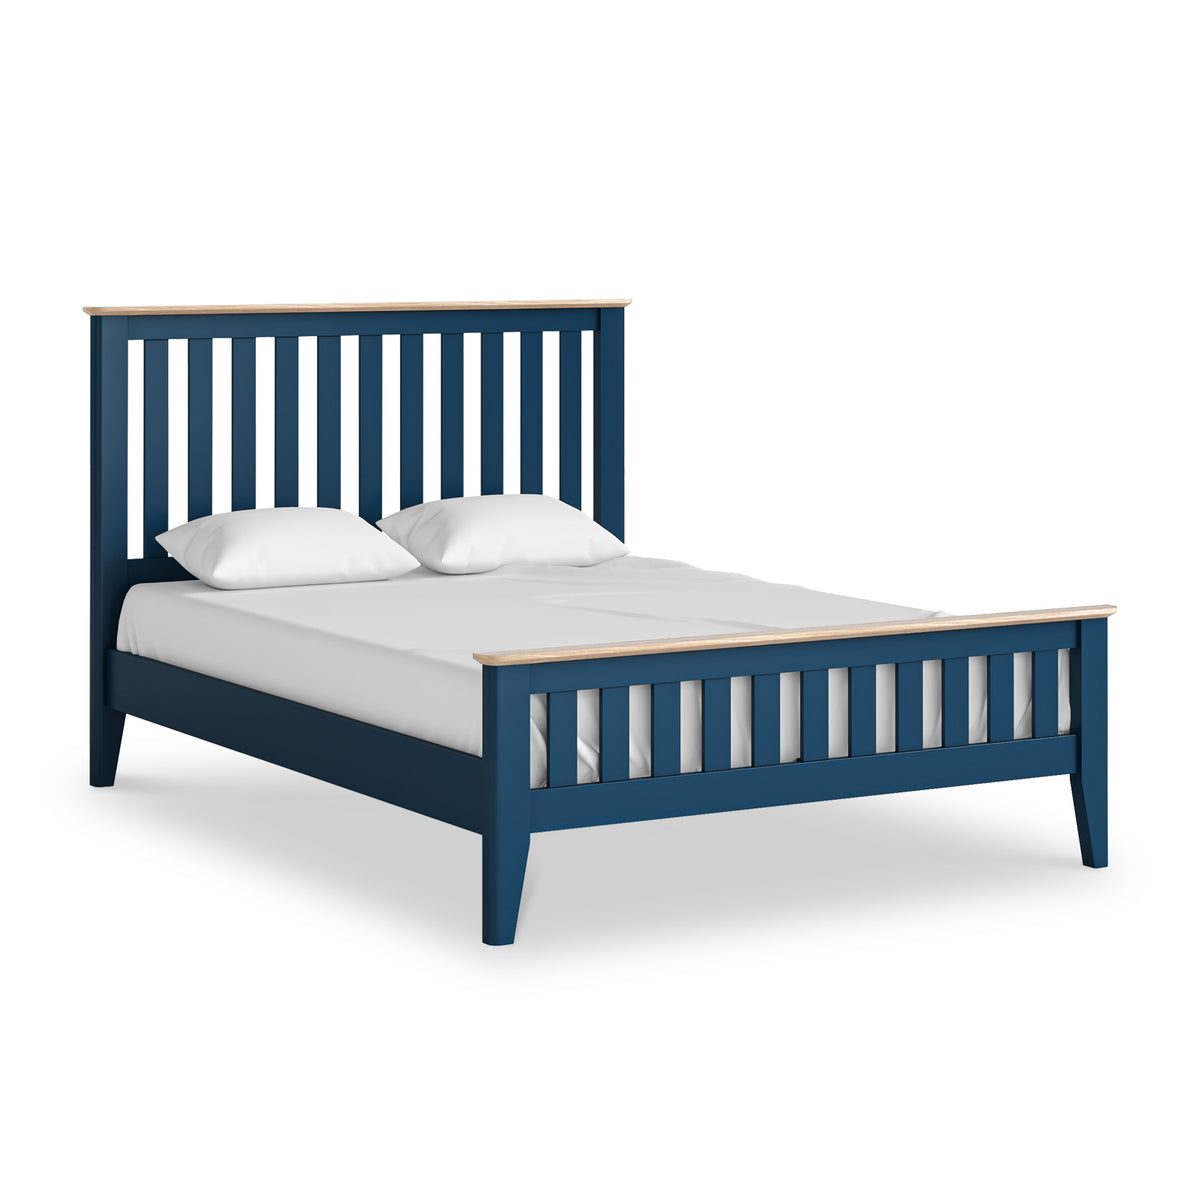 Penrose Navy Blue Double Slatted Bed from Roseland Furniture